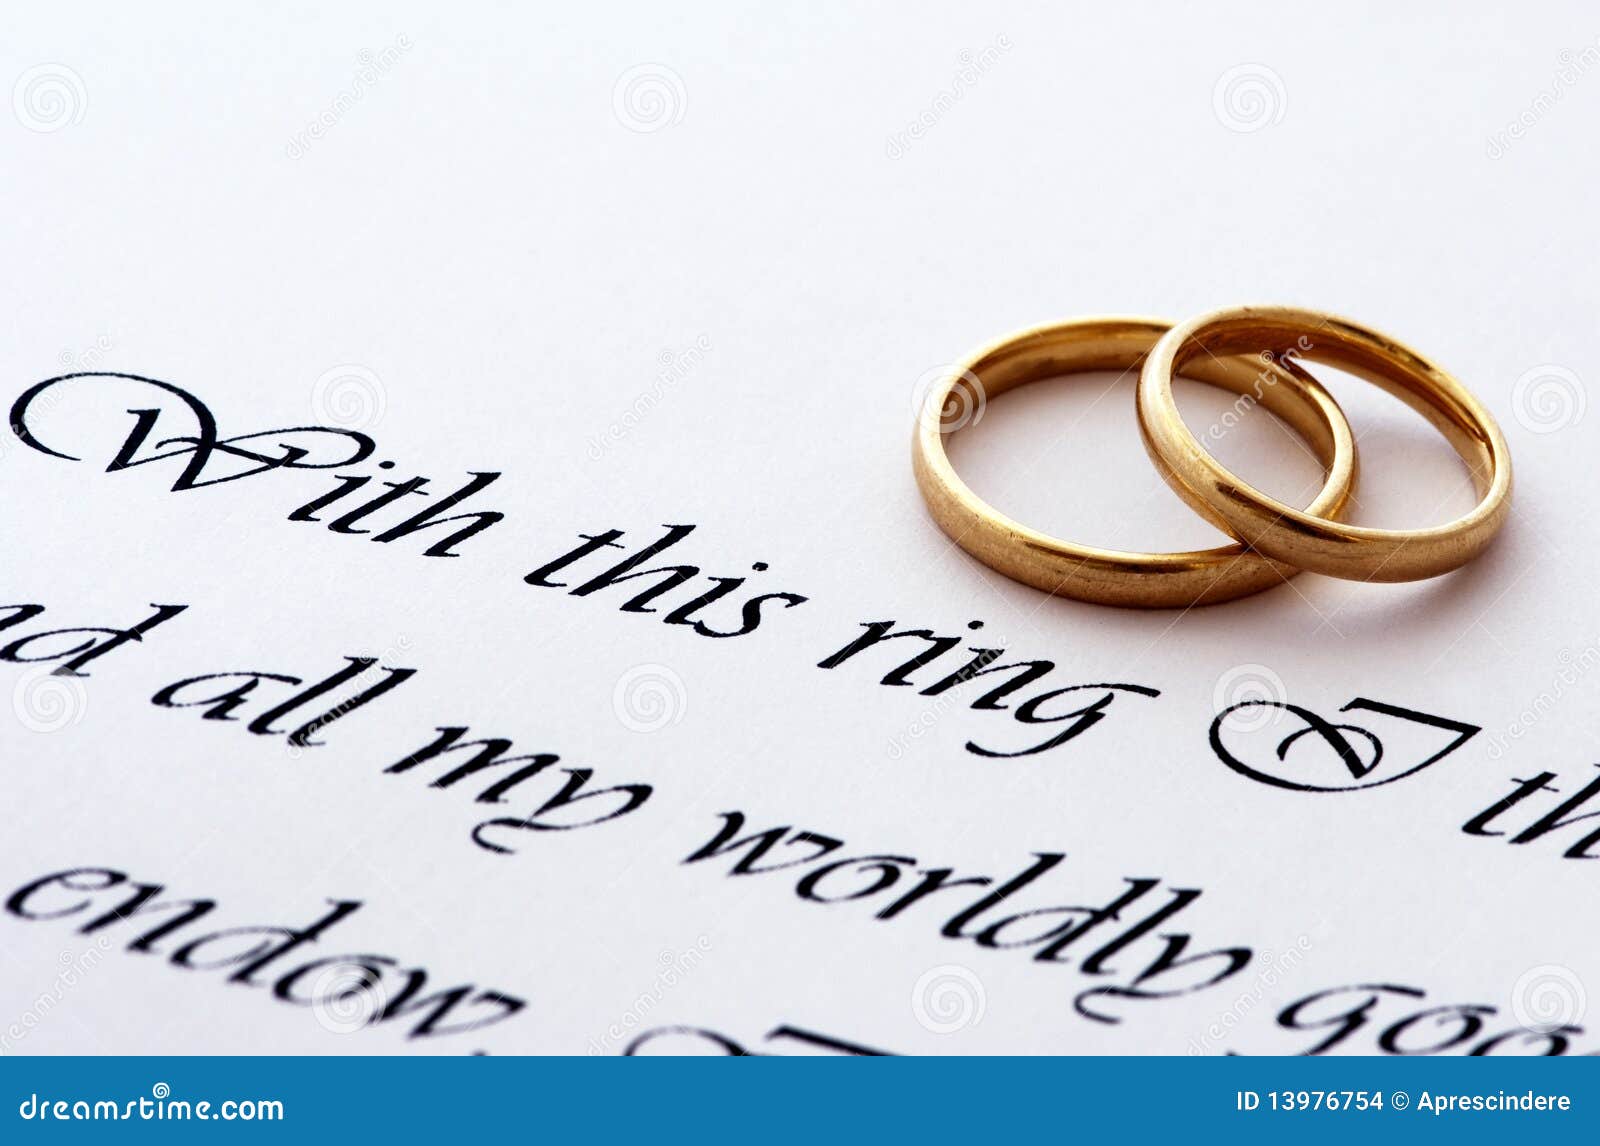 wedding rings and vow